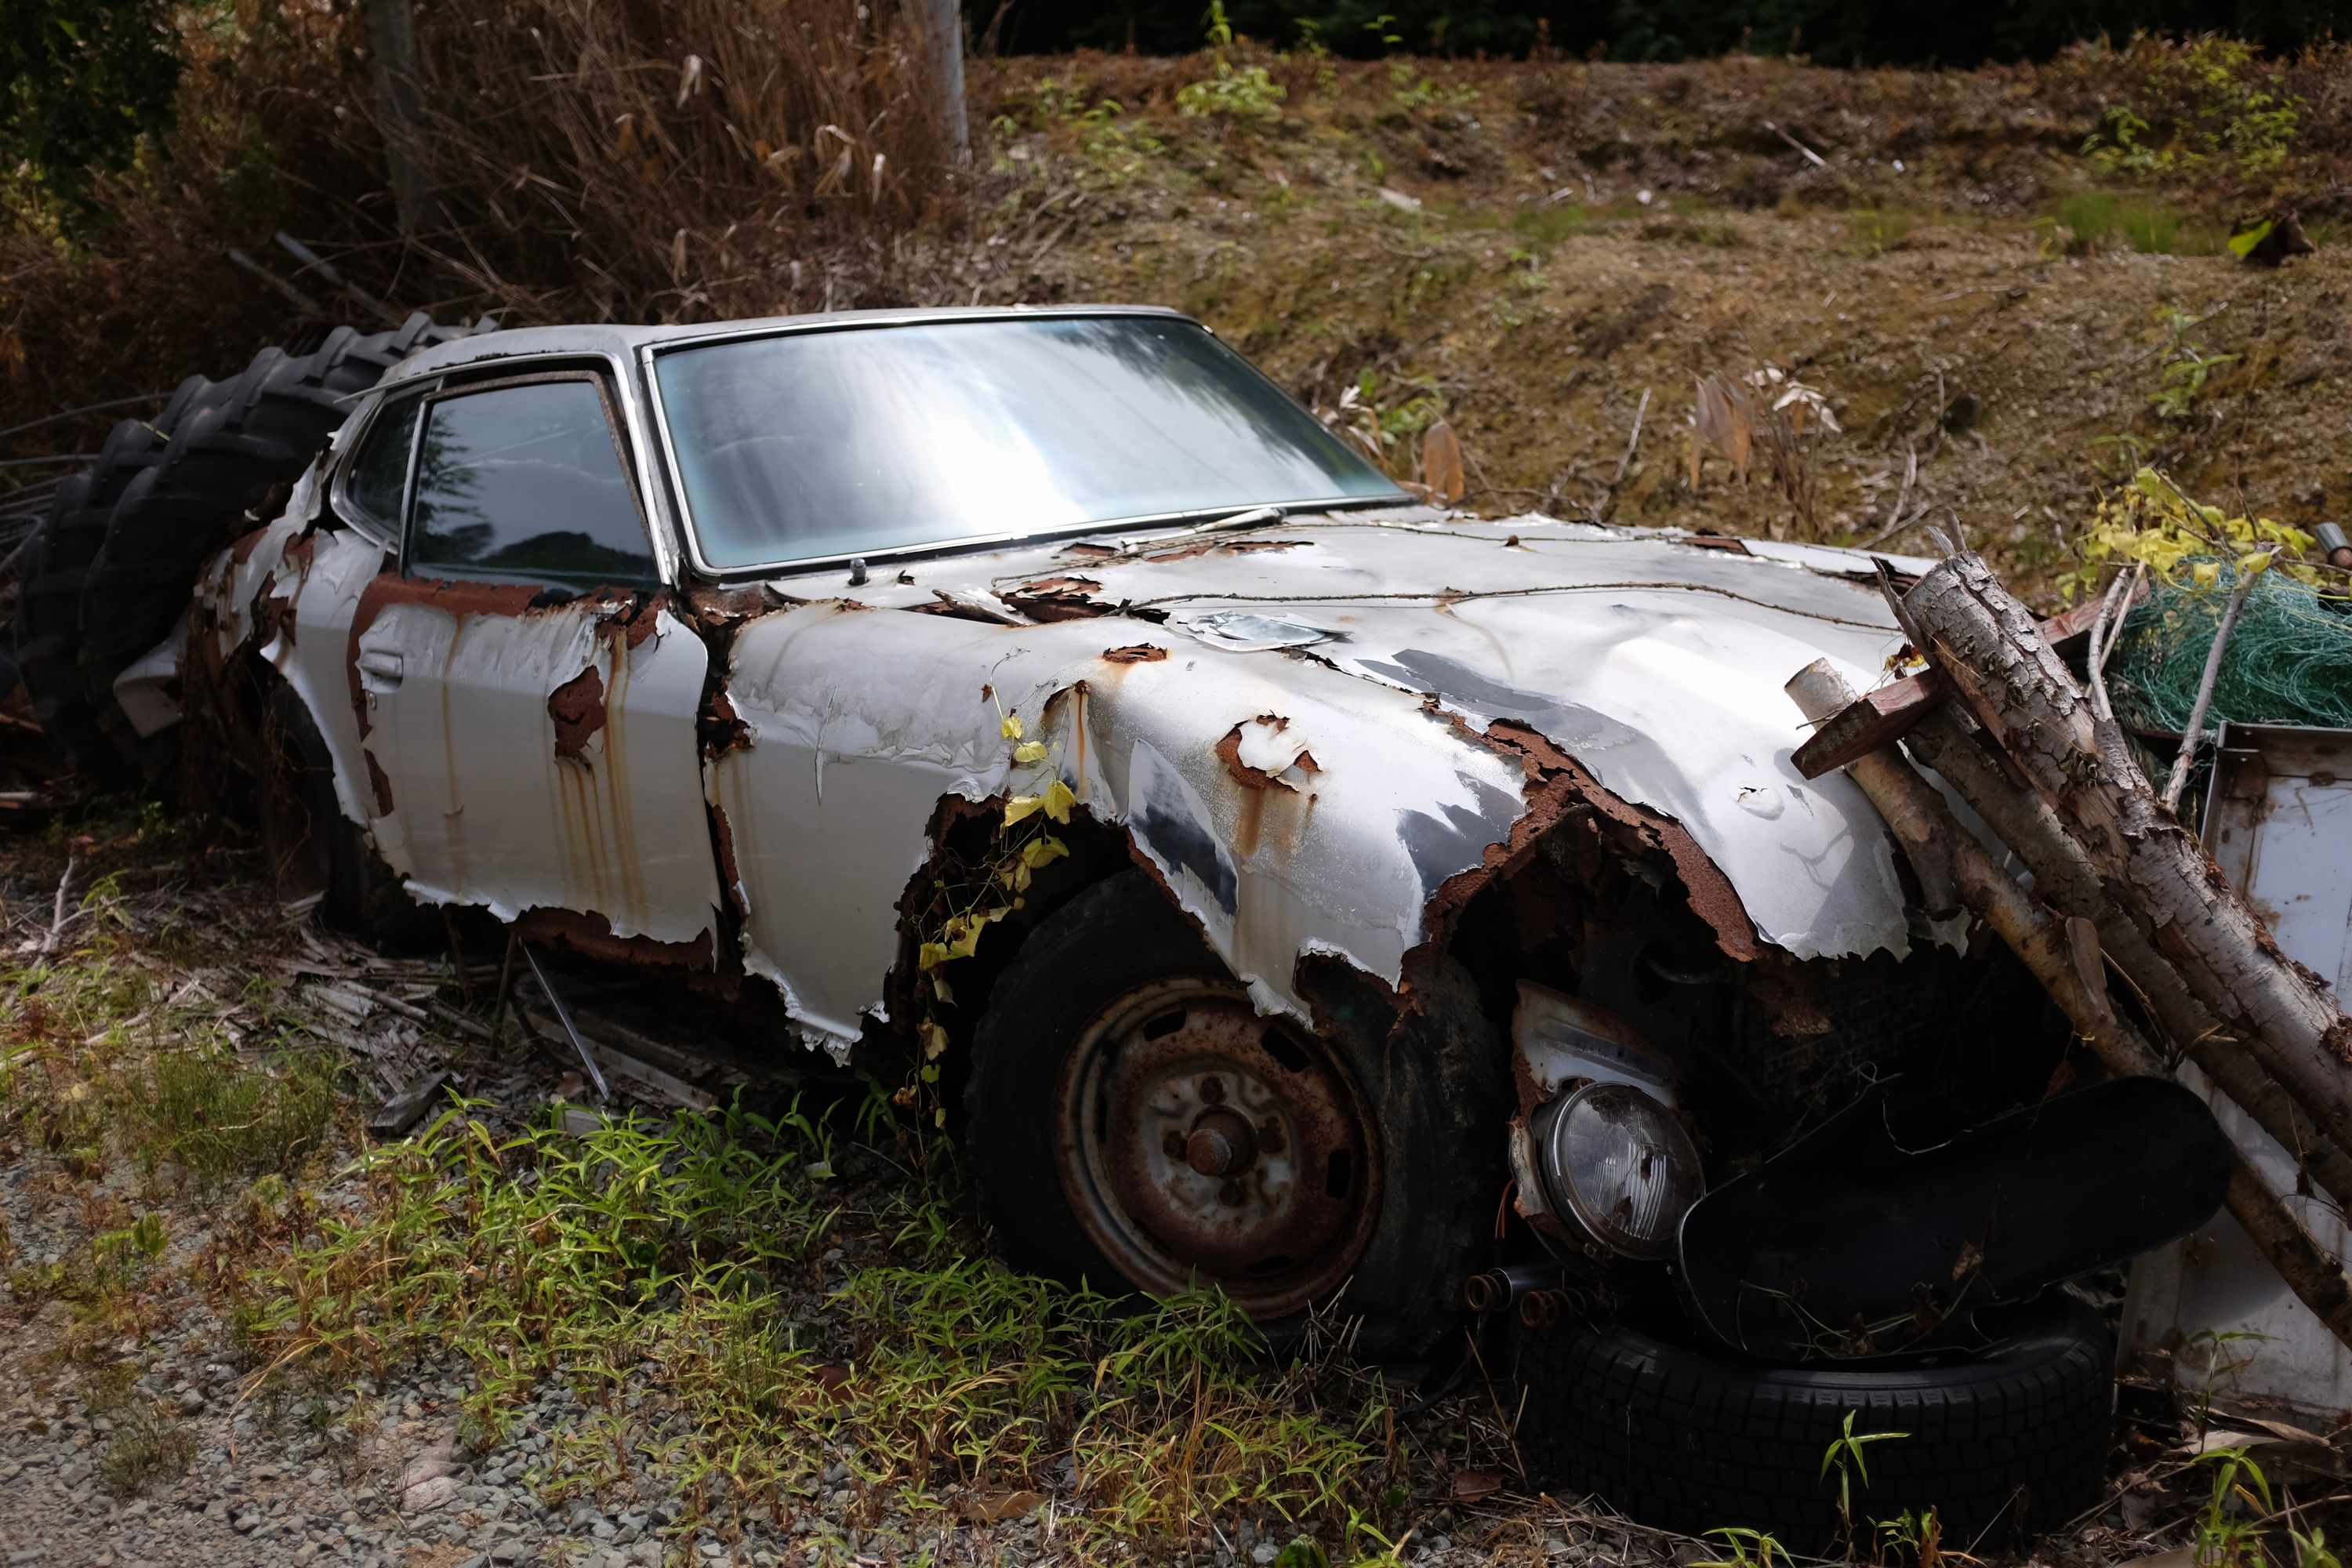 A white Datsun Z sports car in an advanced state of decomposition.